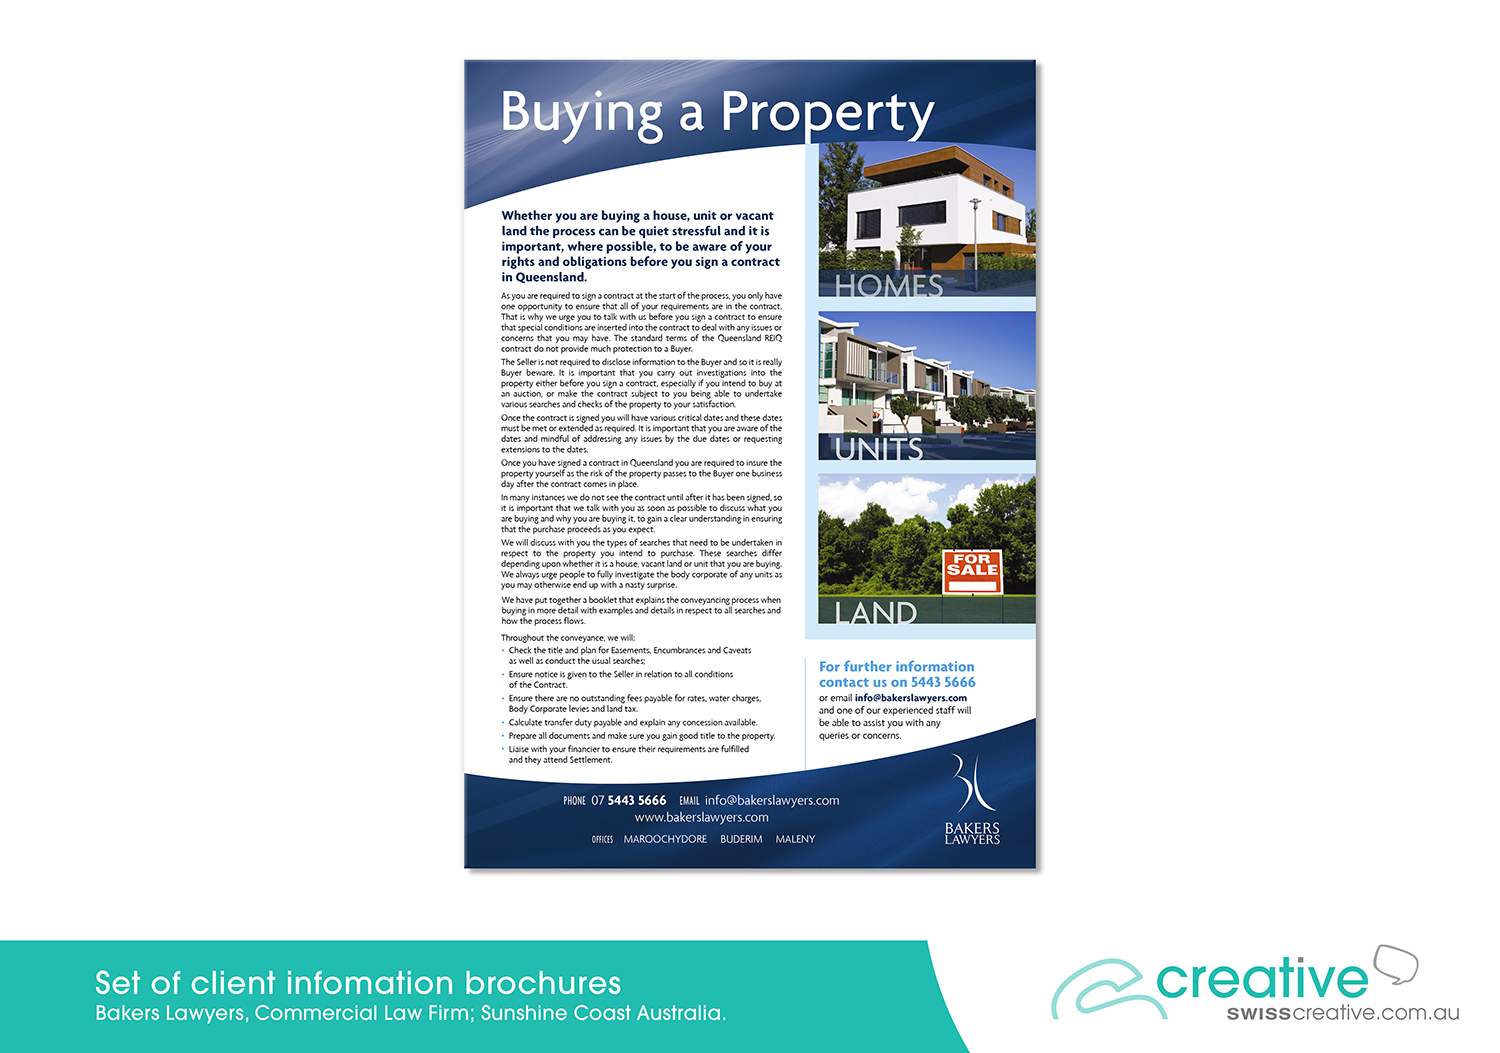 Client information; Buying a proerty